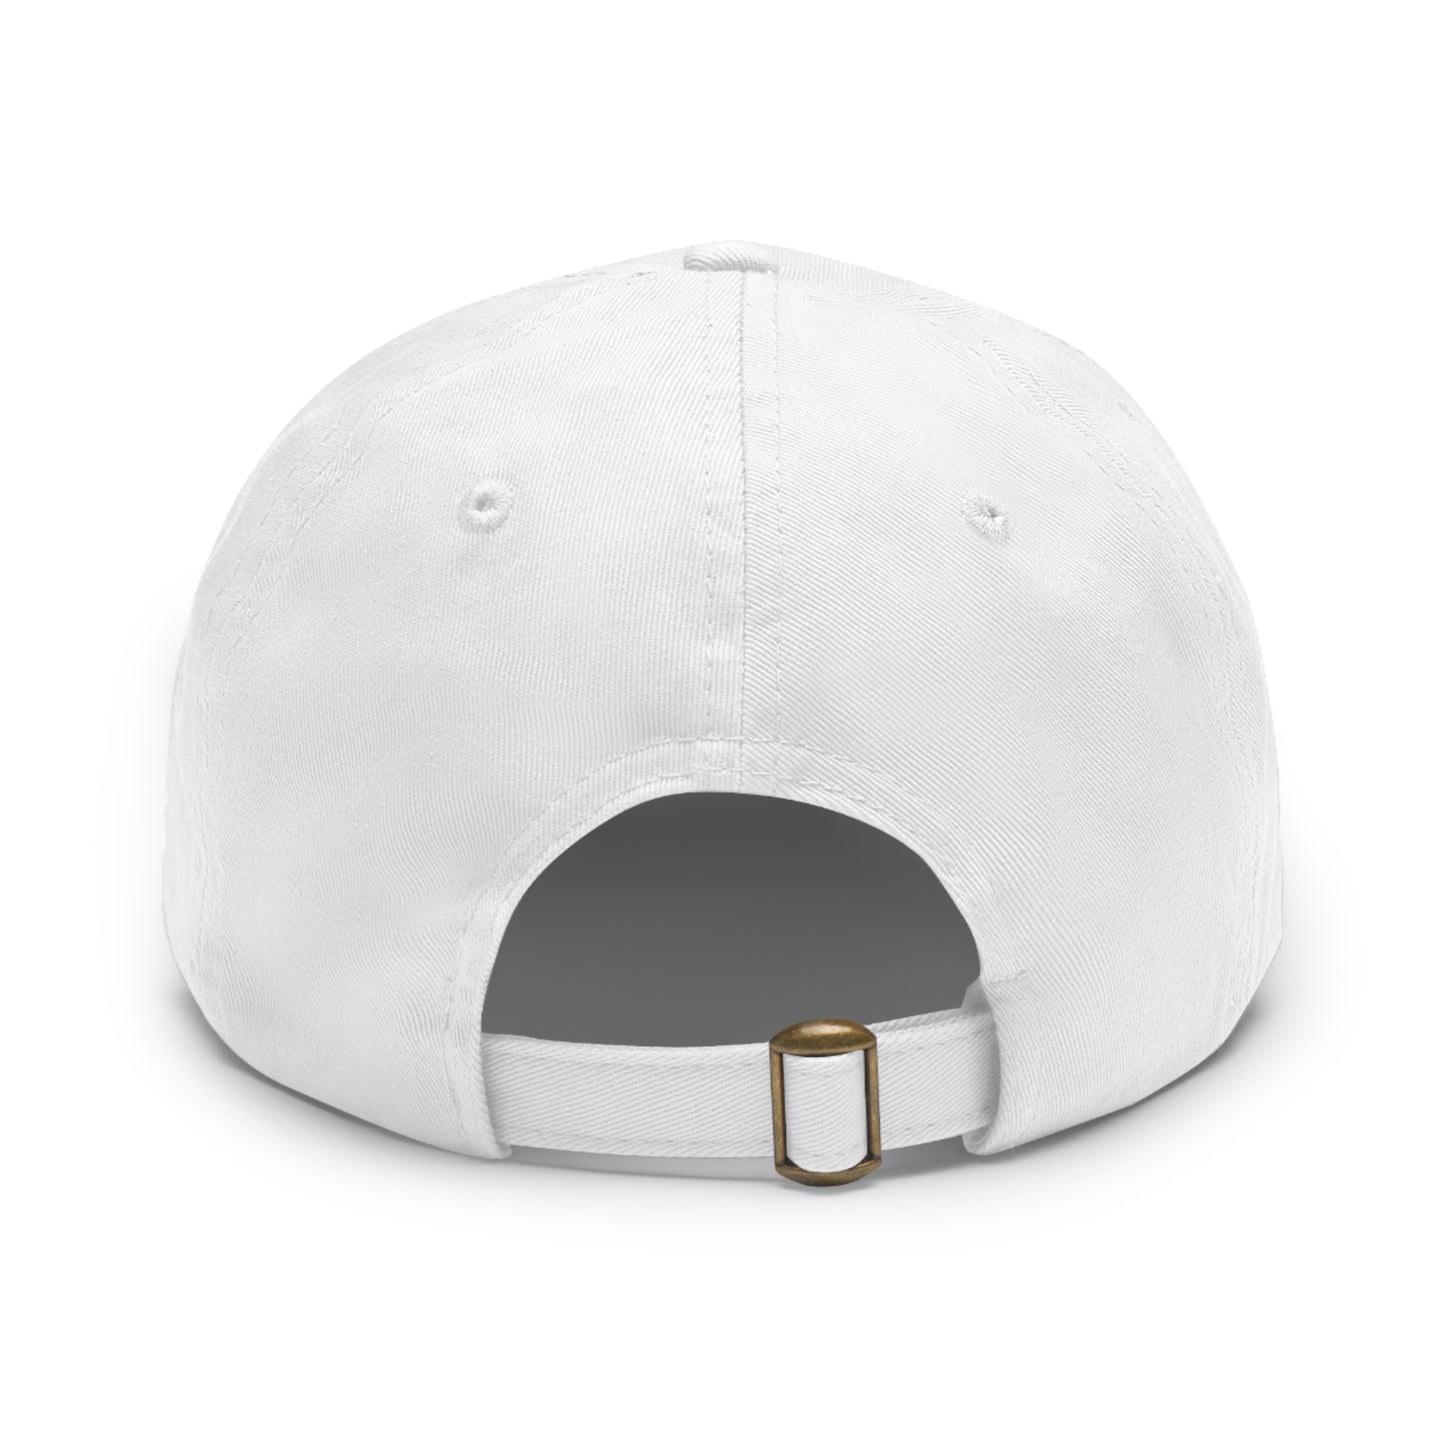 Premium Crap II Dad Hat with Leather Patch (Round)